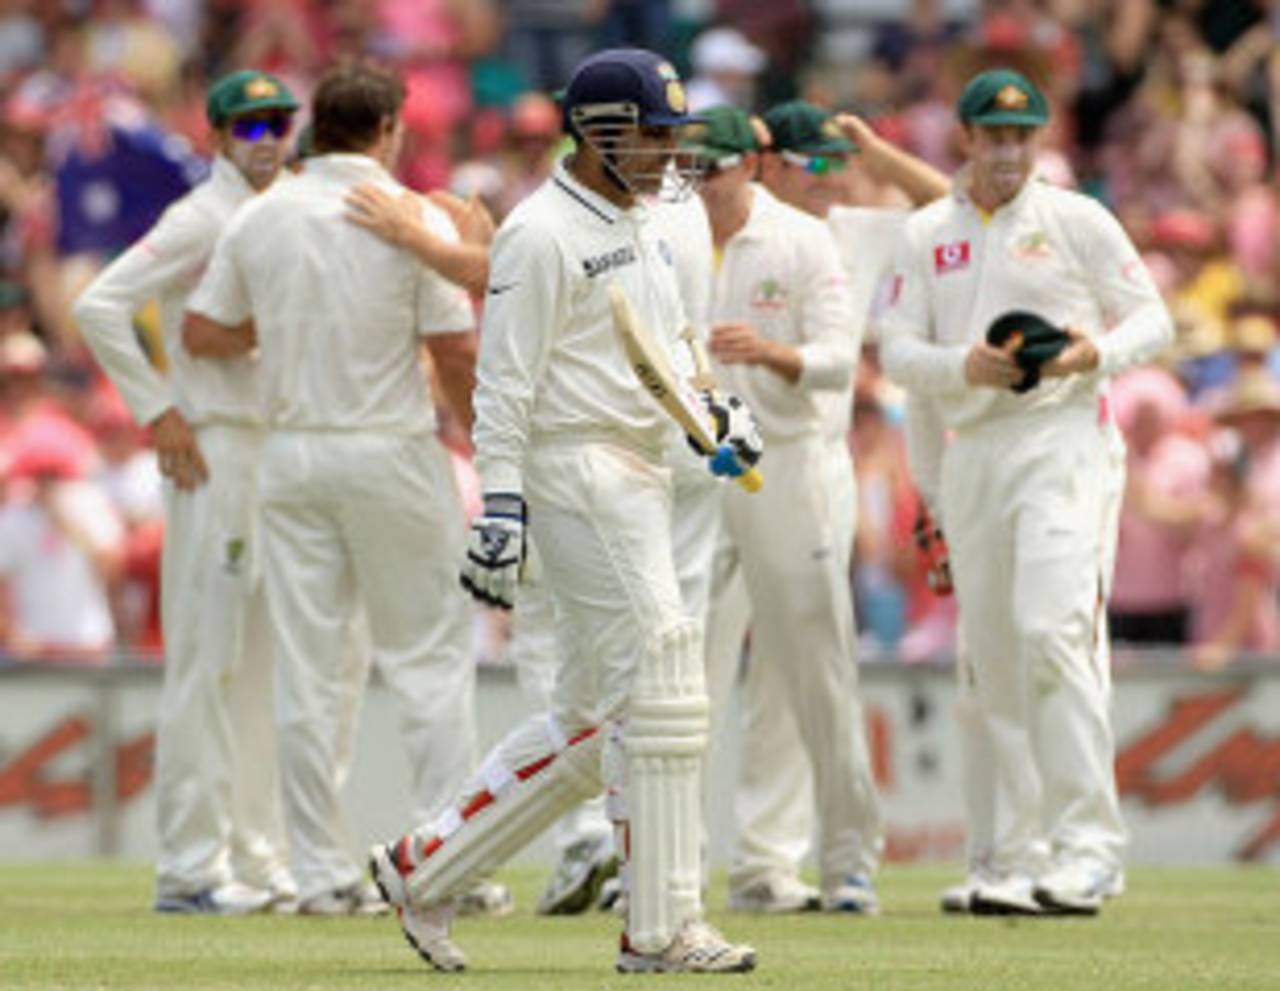 Virender Sehwag was out cheaply, Australia v India, 2nd Test, Sydney, 3rd day, January 5, 2012